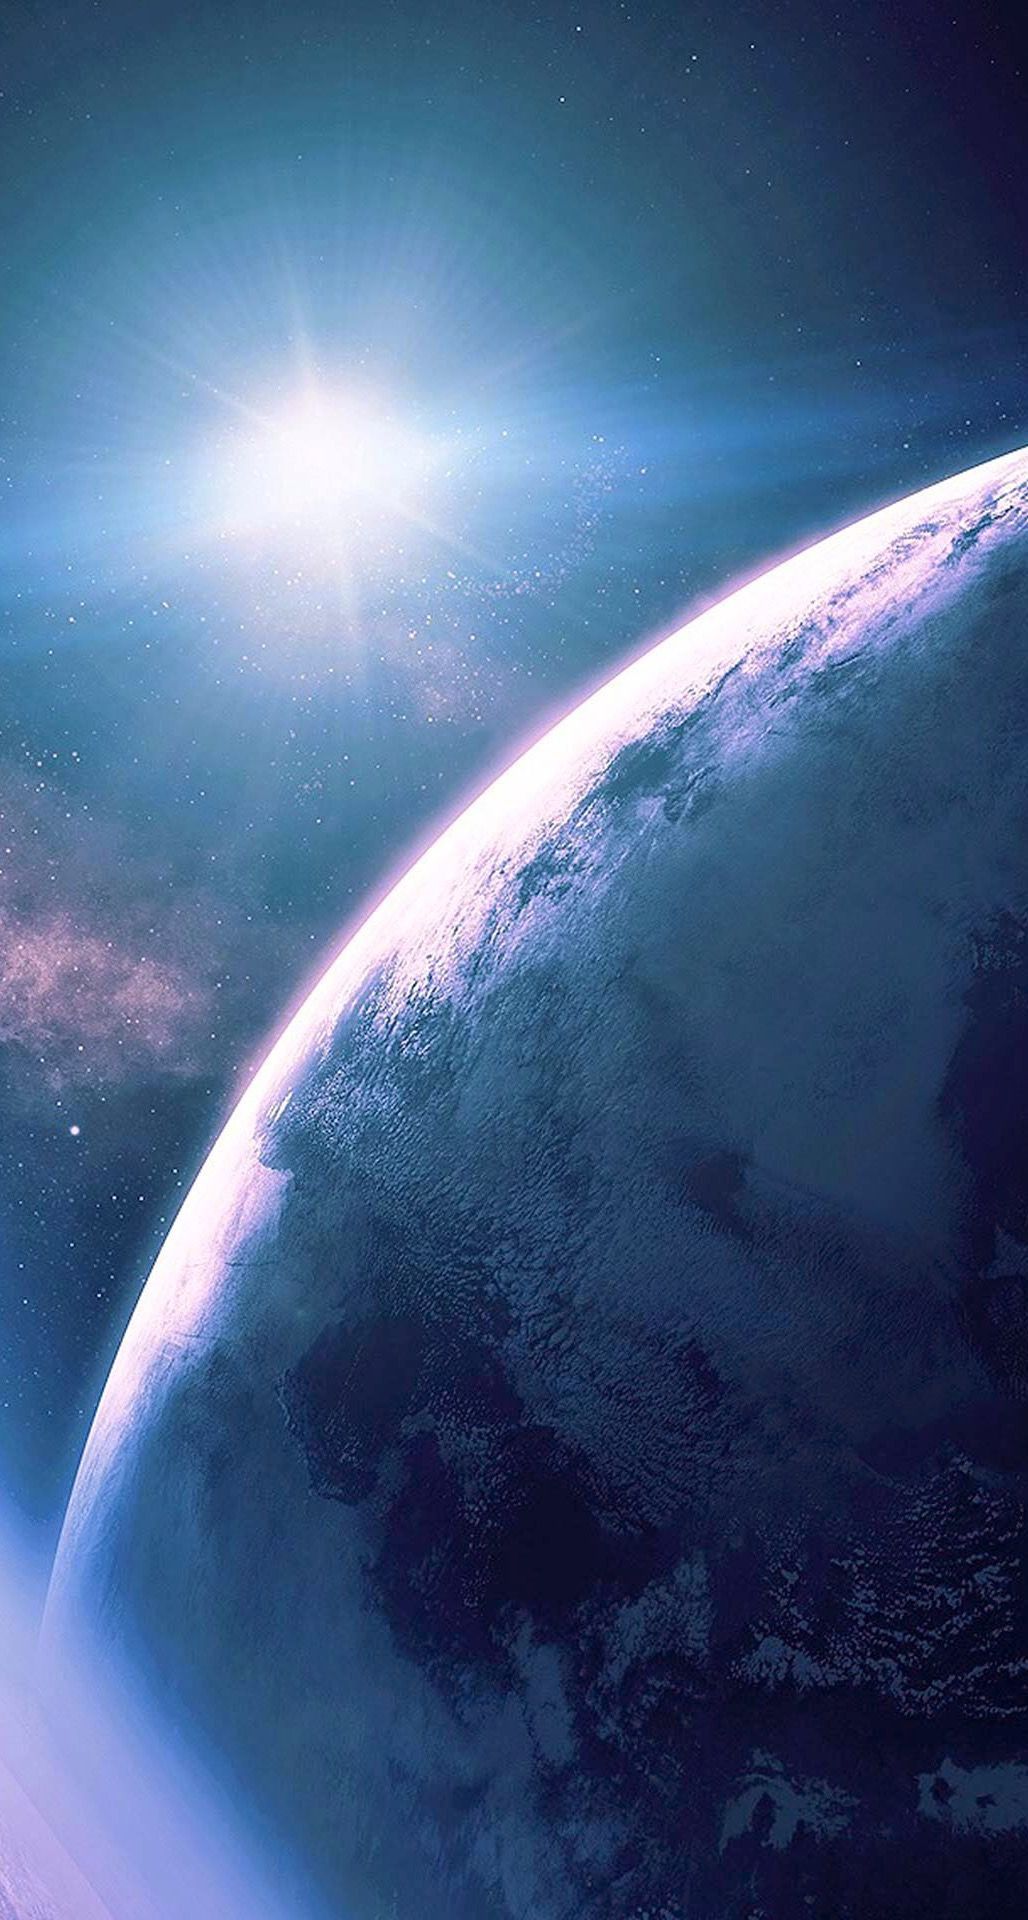 IPhone planet wallpaper by 9dit0r  Download on ZEDGE  24bb